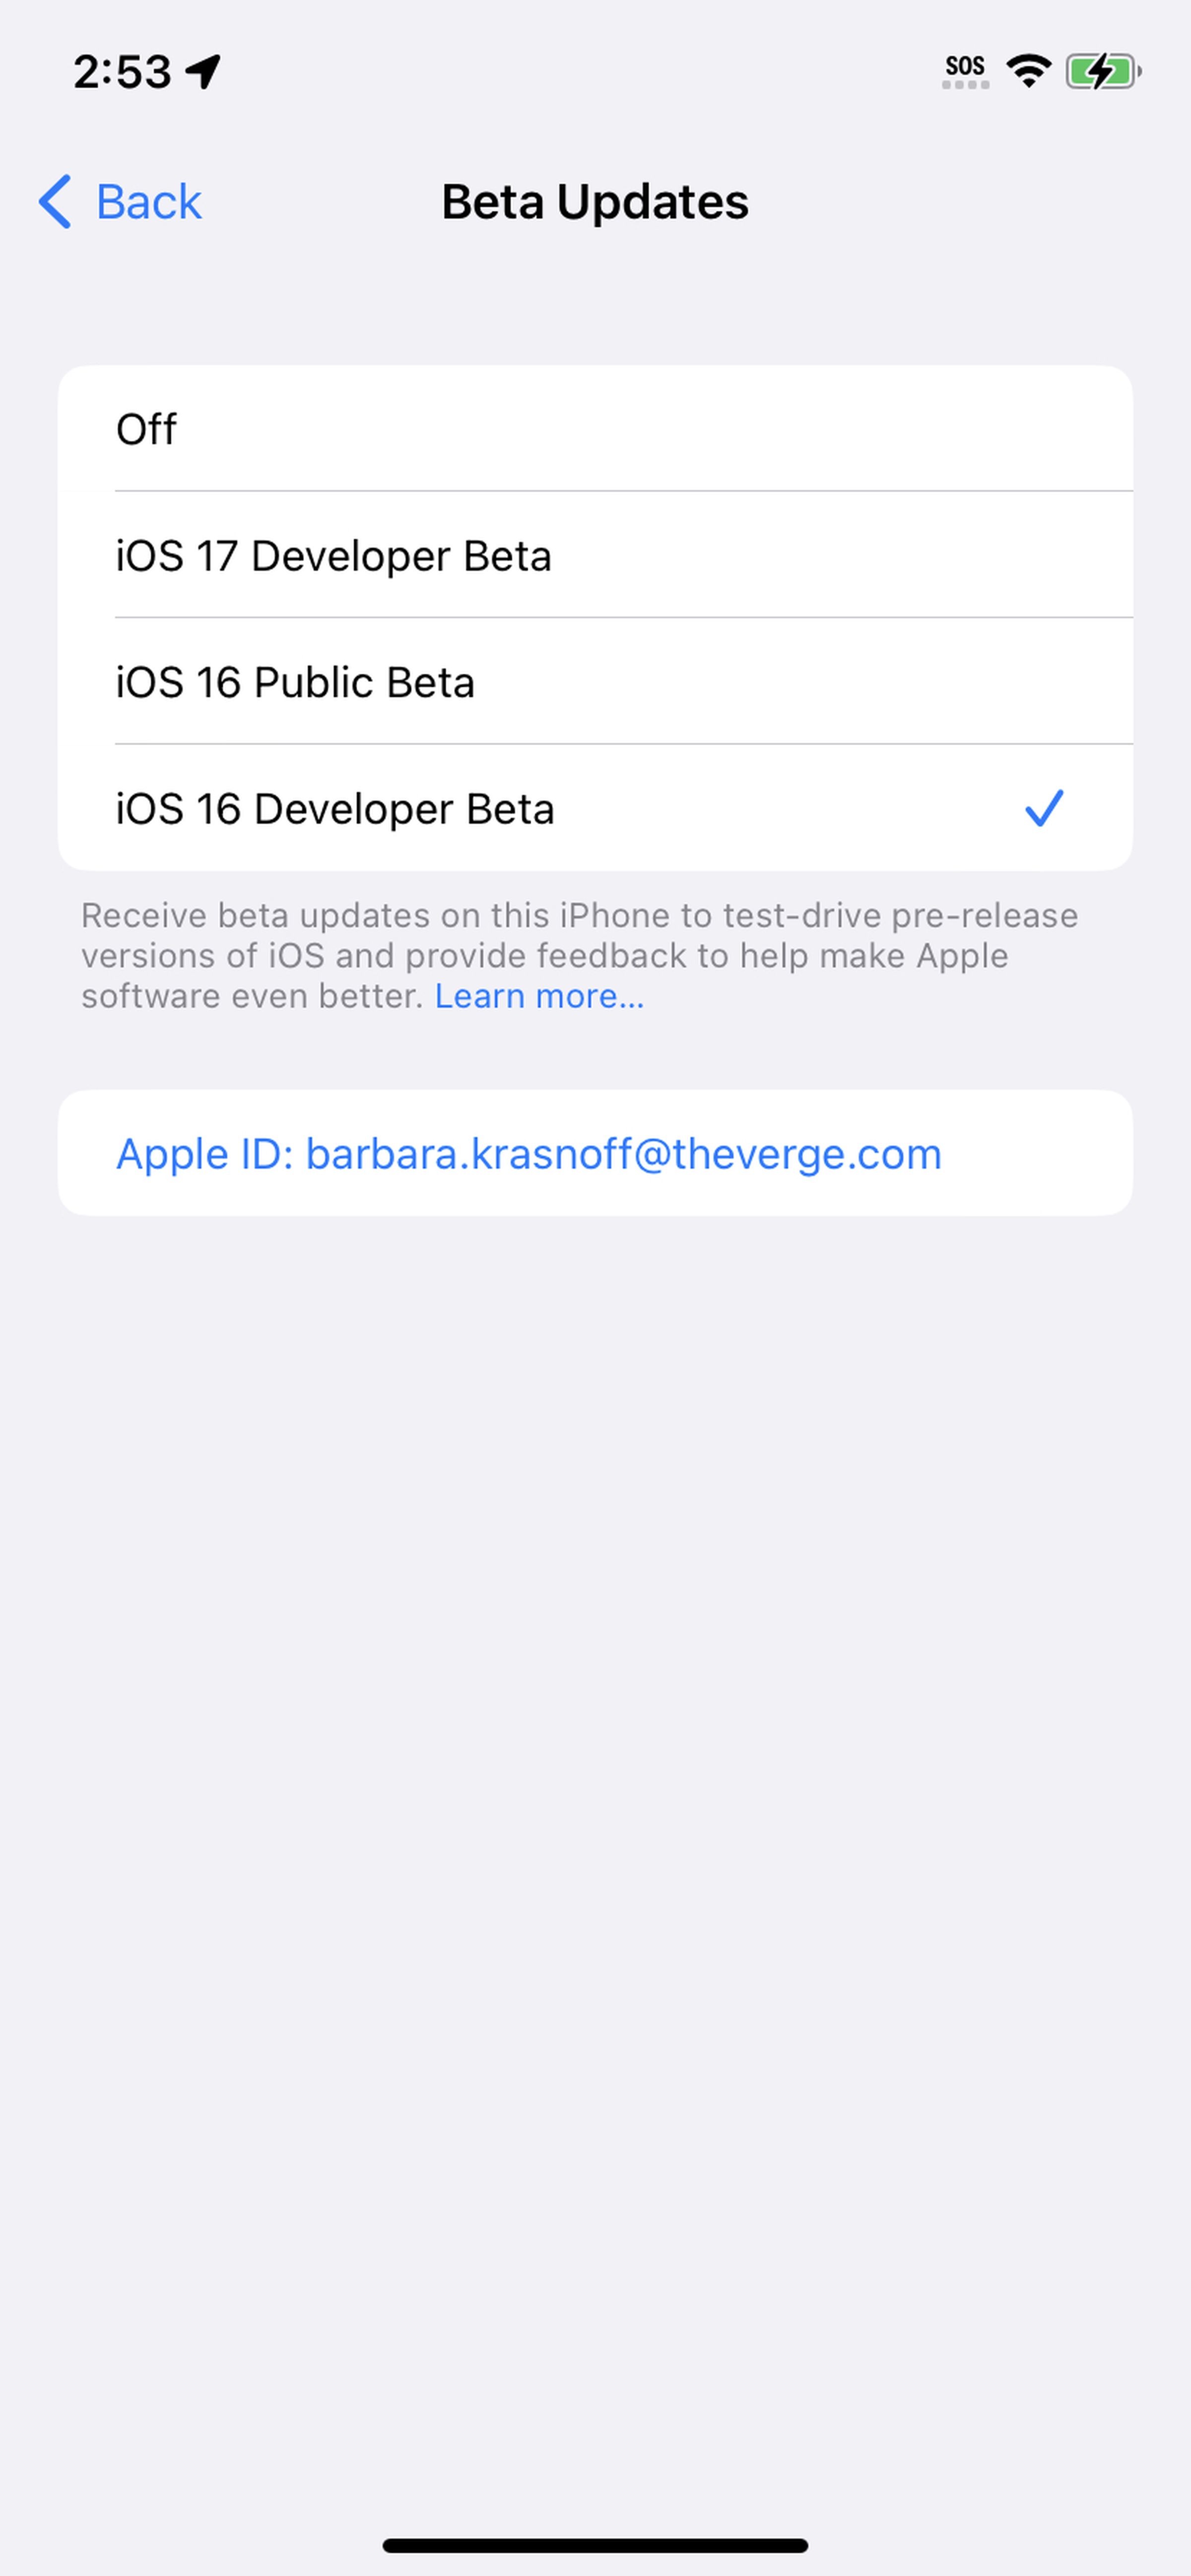 Beta updates page on iPhone